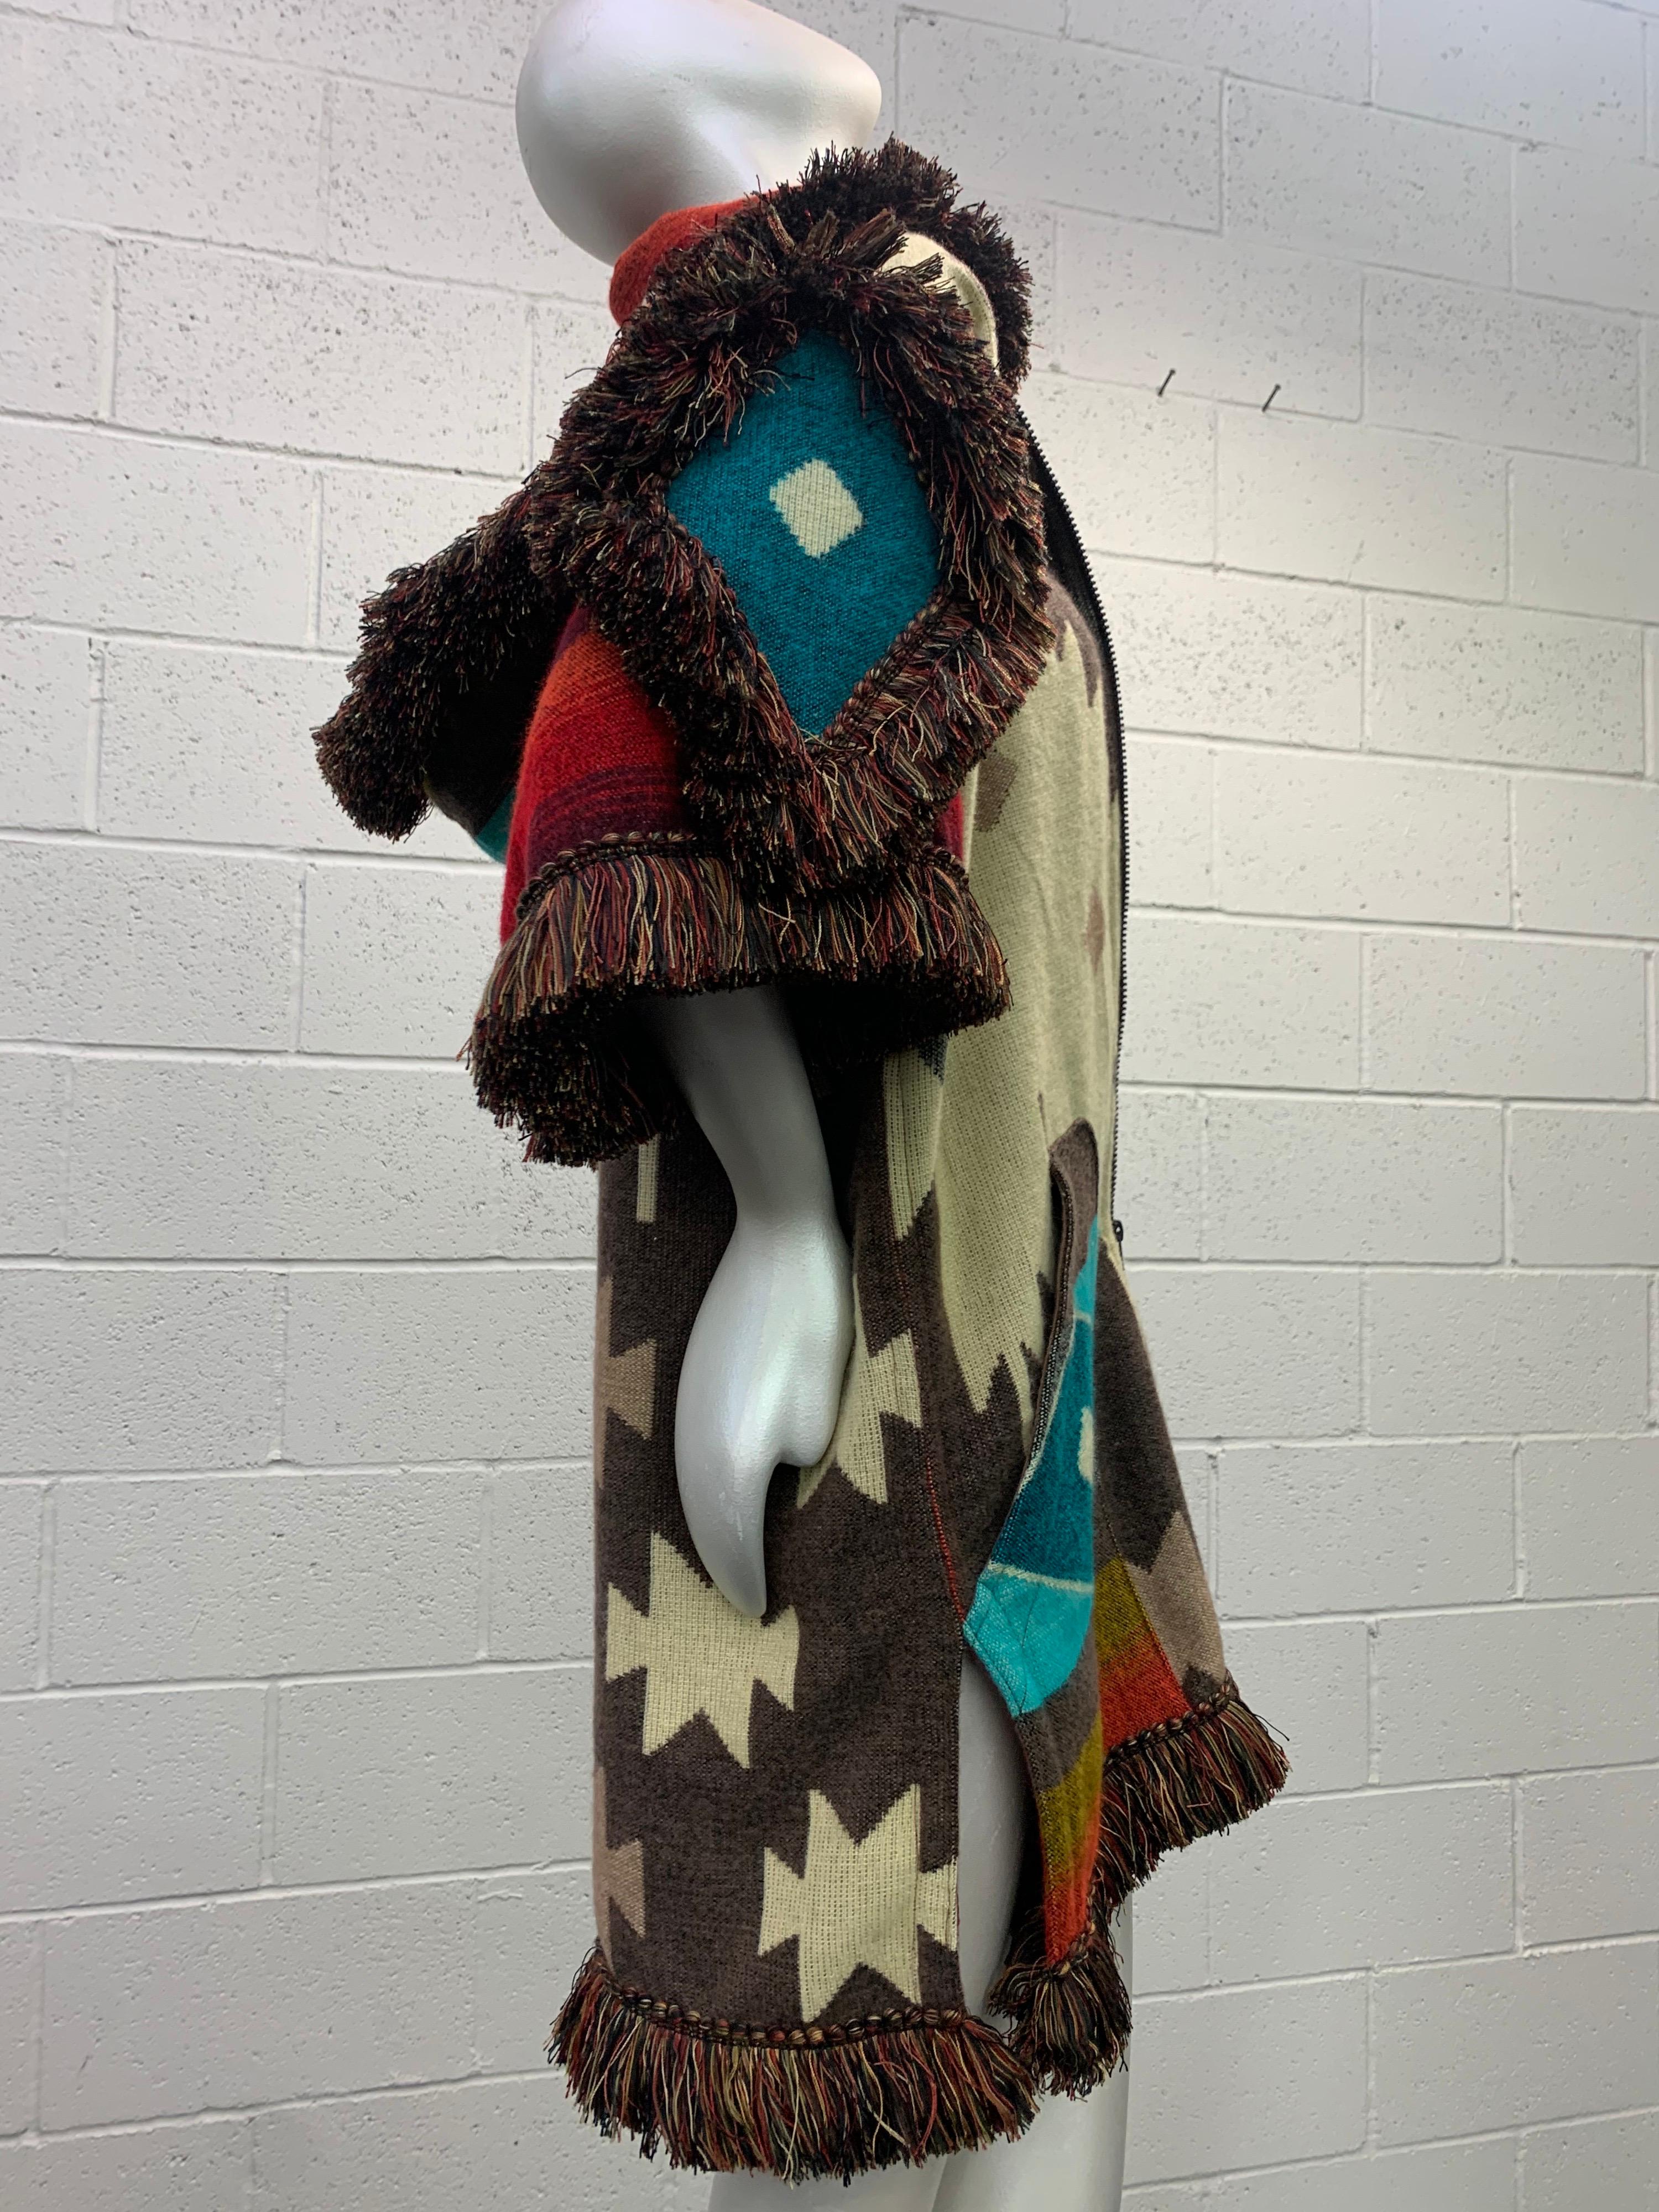 From our Torso Creations atelier comes this Ecuadorian made, ultra-soft woven wool blanket designed into a hooded, double-zip front unisex  jacket with pouch pockets and trimmed in lush ombre rayon fringe .

The bold motif in traditional Ecuadorian